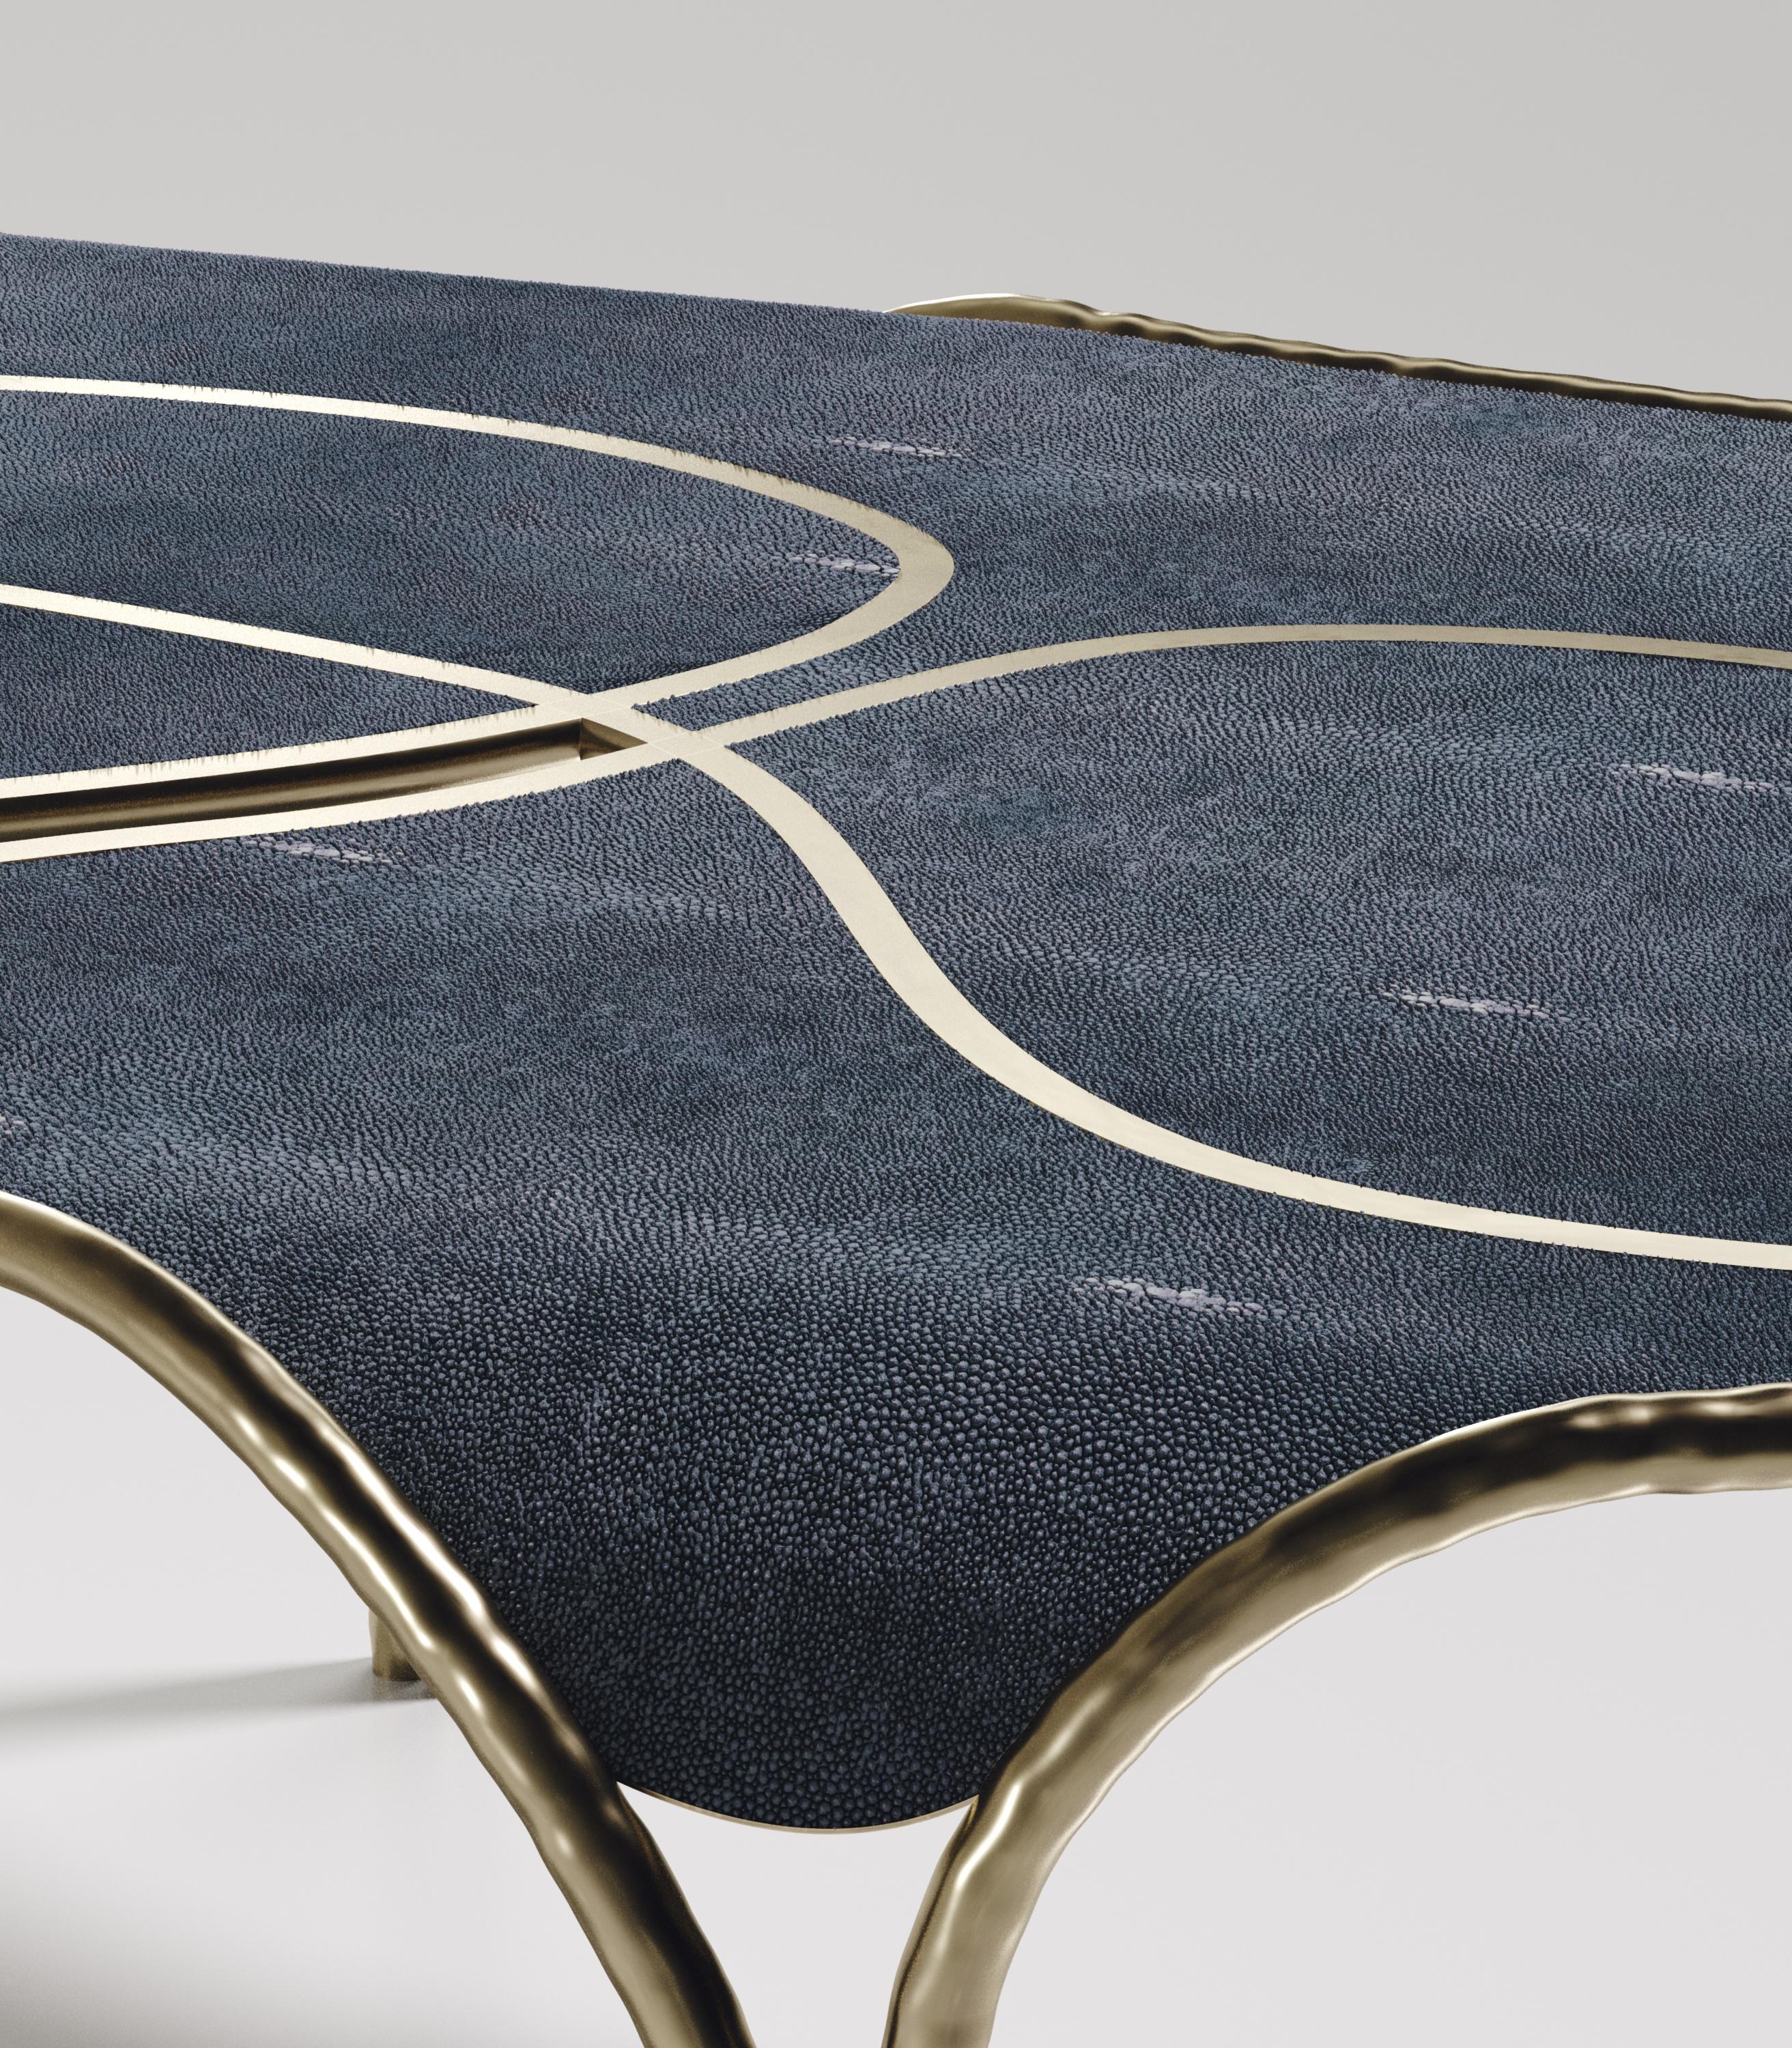 The Arianne coffee table by R&Y Augousti is one of a kind statement and whimsical piece. The overall piece is inlaid in a denim blue shagreen accentuated with intricate bronze-patina brass details that have the signature Augousti 